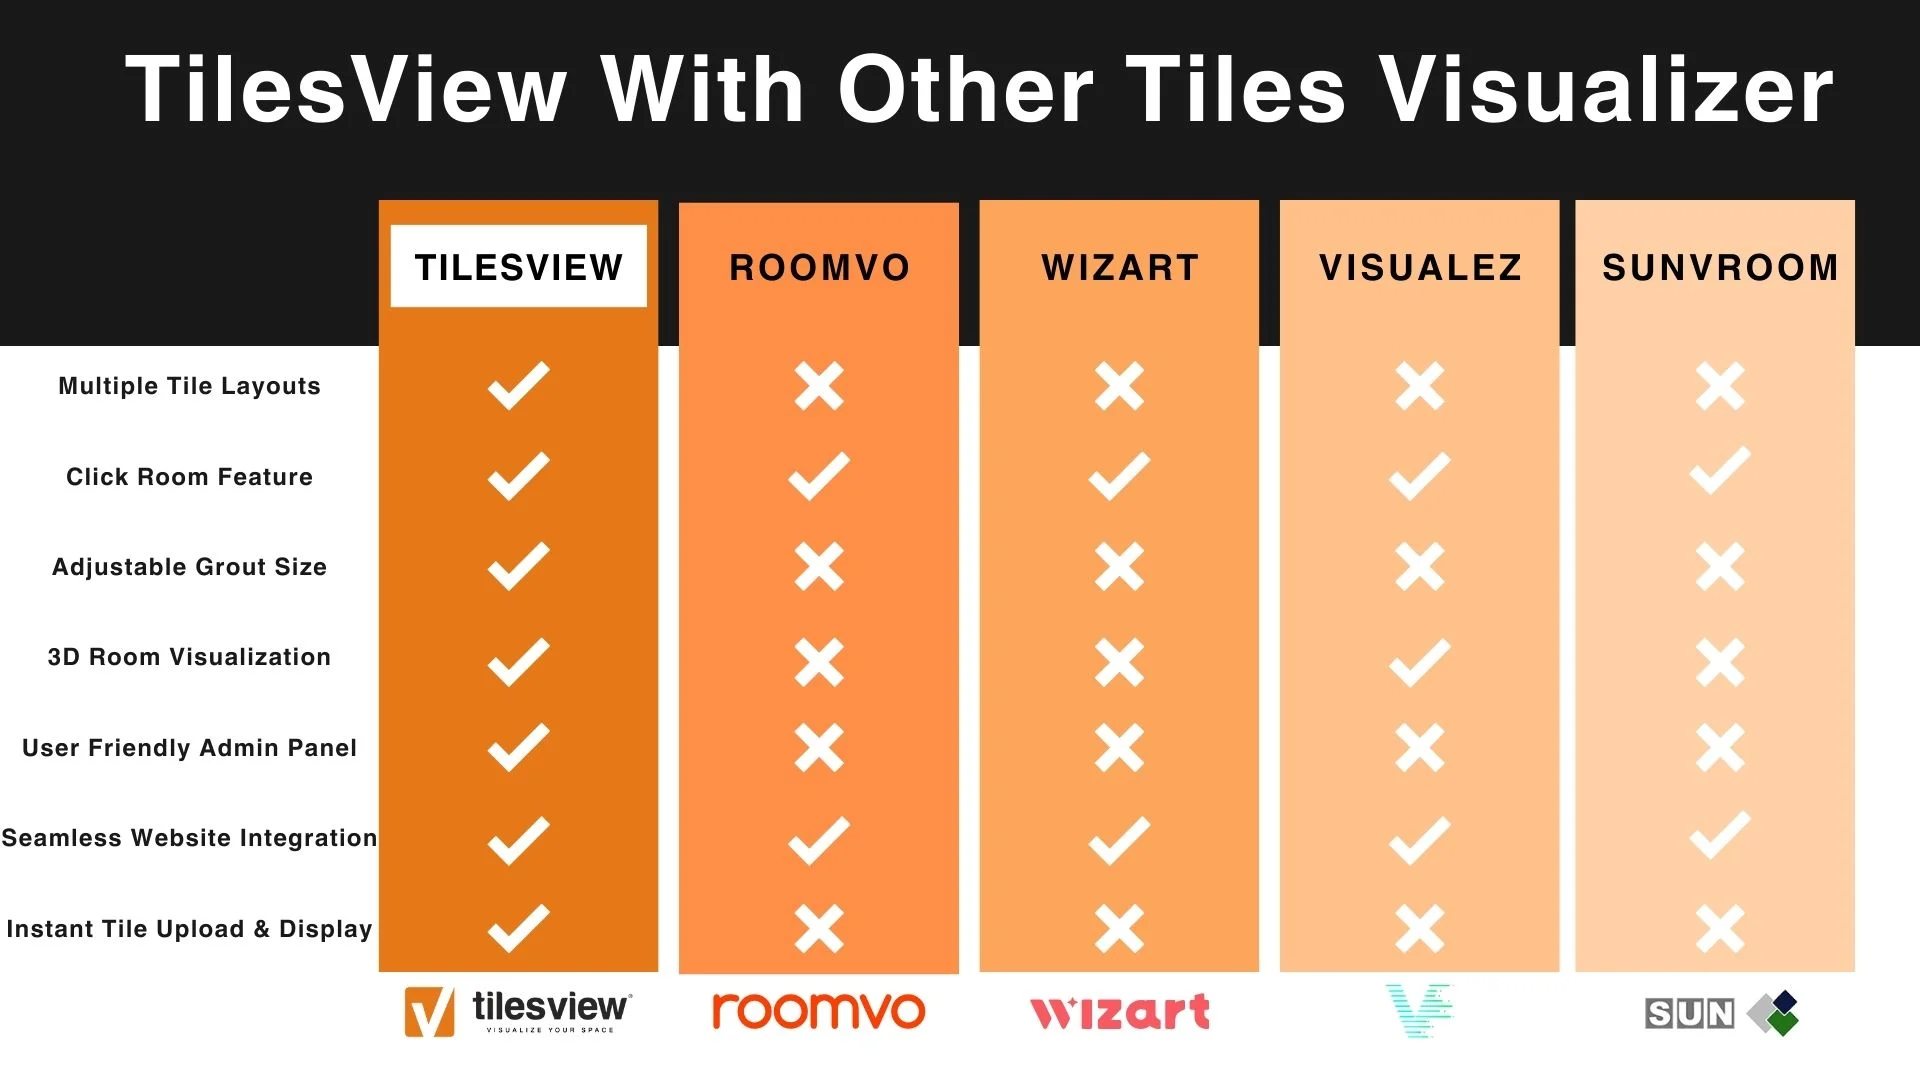 Comparing TilesView With Other Tiles Visualizer